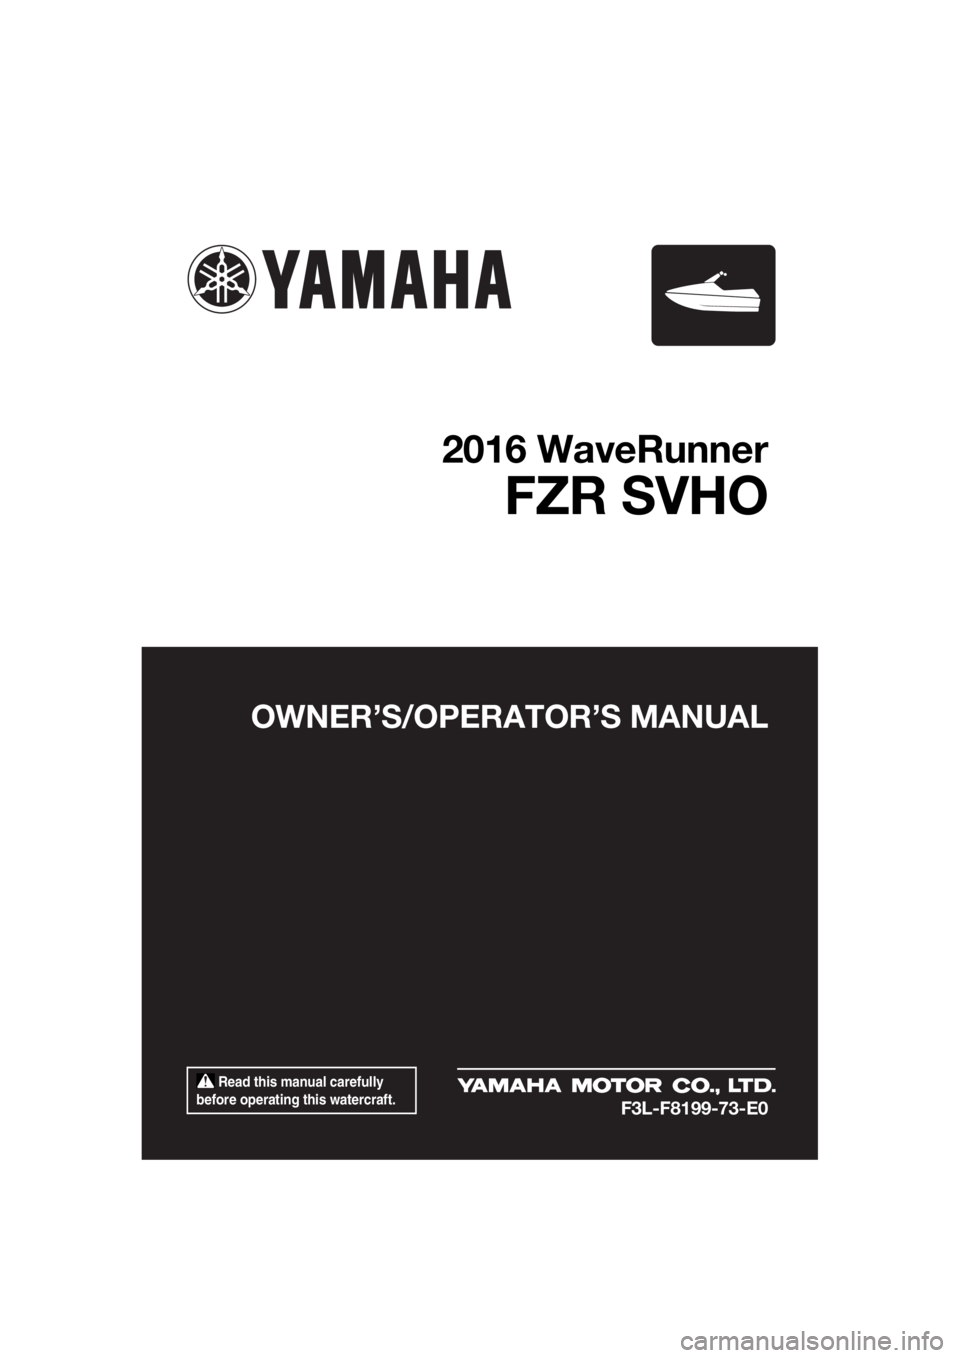 YAMAHA FZR SVHO 2016  Owners Manual  Read this manual carefully 
before operating this watercraft.
OWNER’S/OPERAT OR’S MANUAL
2016 WaveRunner
FZR SVHO
F3L-F8199-73-E0
UF3L73E0.book  Page 1  Thursday, August 27, 2015  3:18 PM 